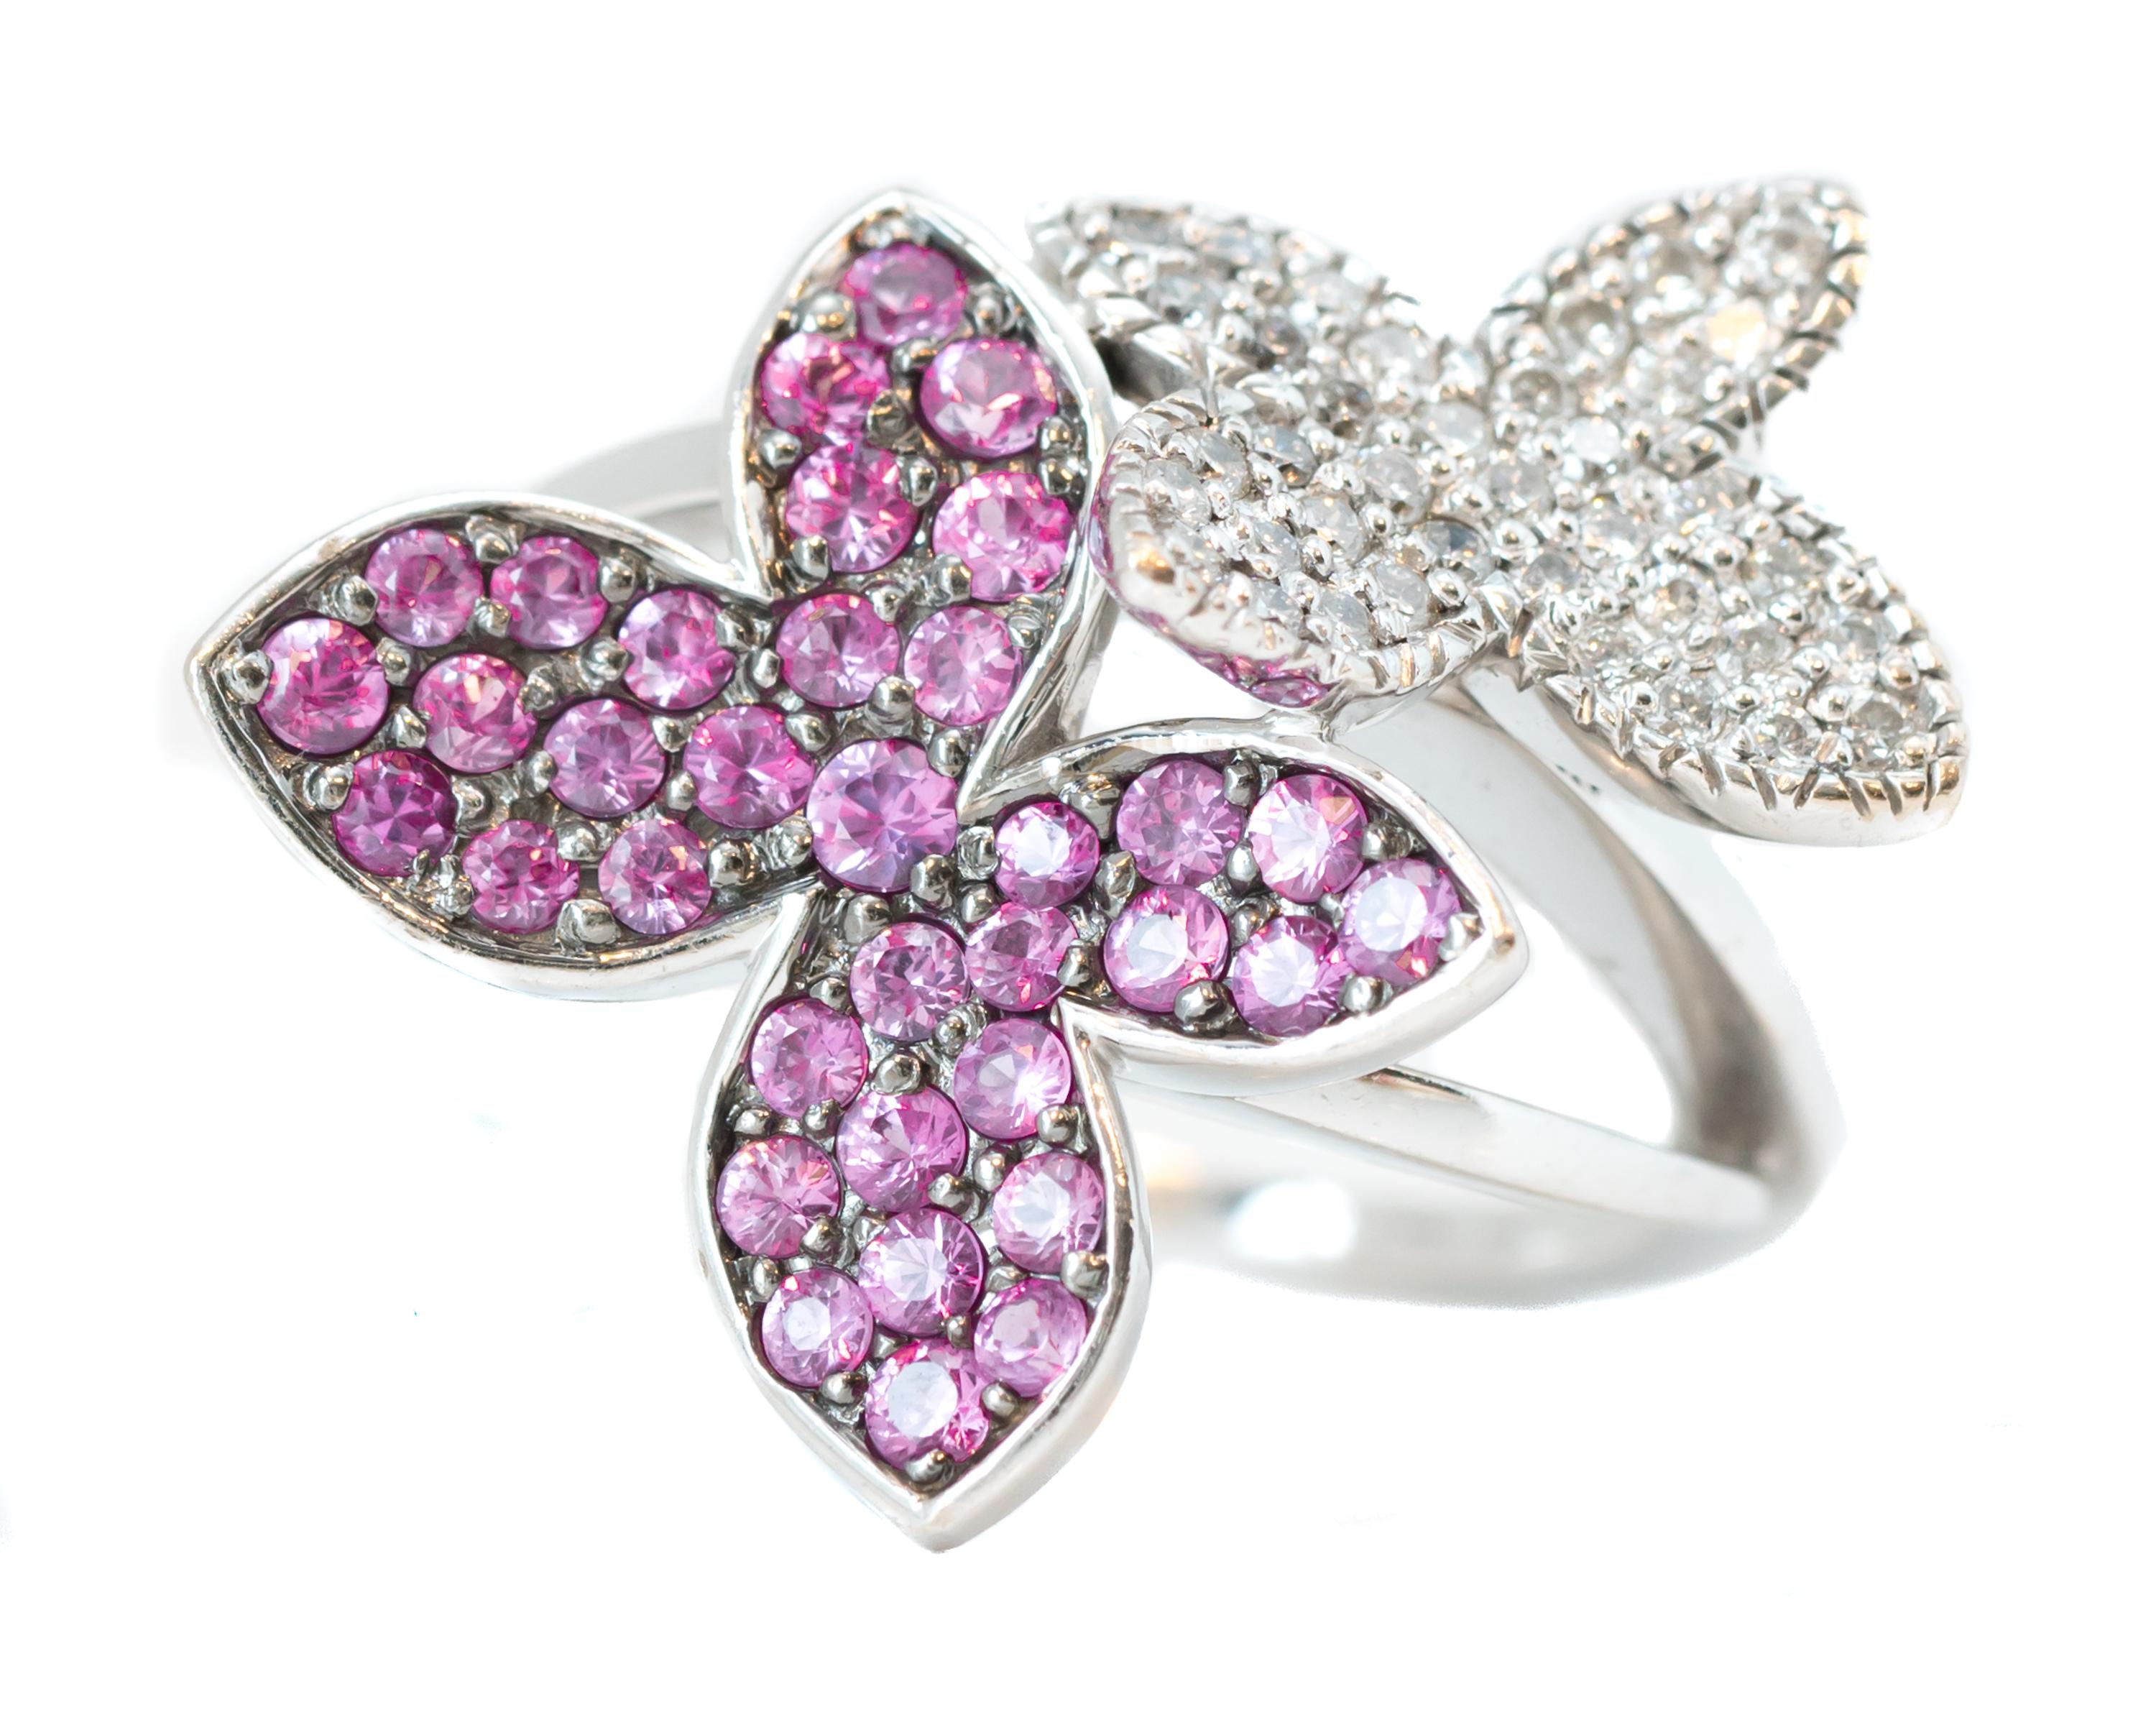 Features:
0.25 carat total Round Brilliant Diamonds and 0.25 carat total Round Pink Sapphires in a gorgeous floral design crafted in 14 karat White Gold
The ring has a modified bypass 2-flower design with open shoulders 


Ring Details:
Size: 7.75,